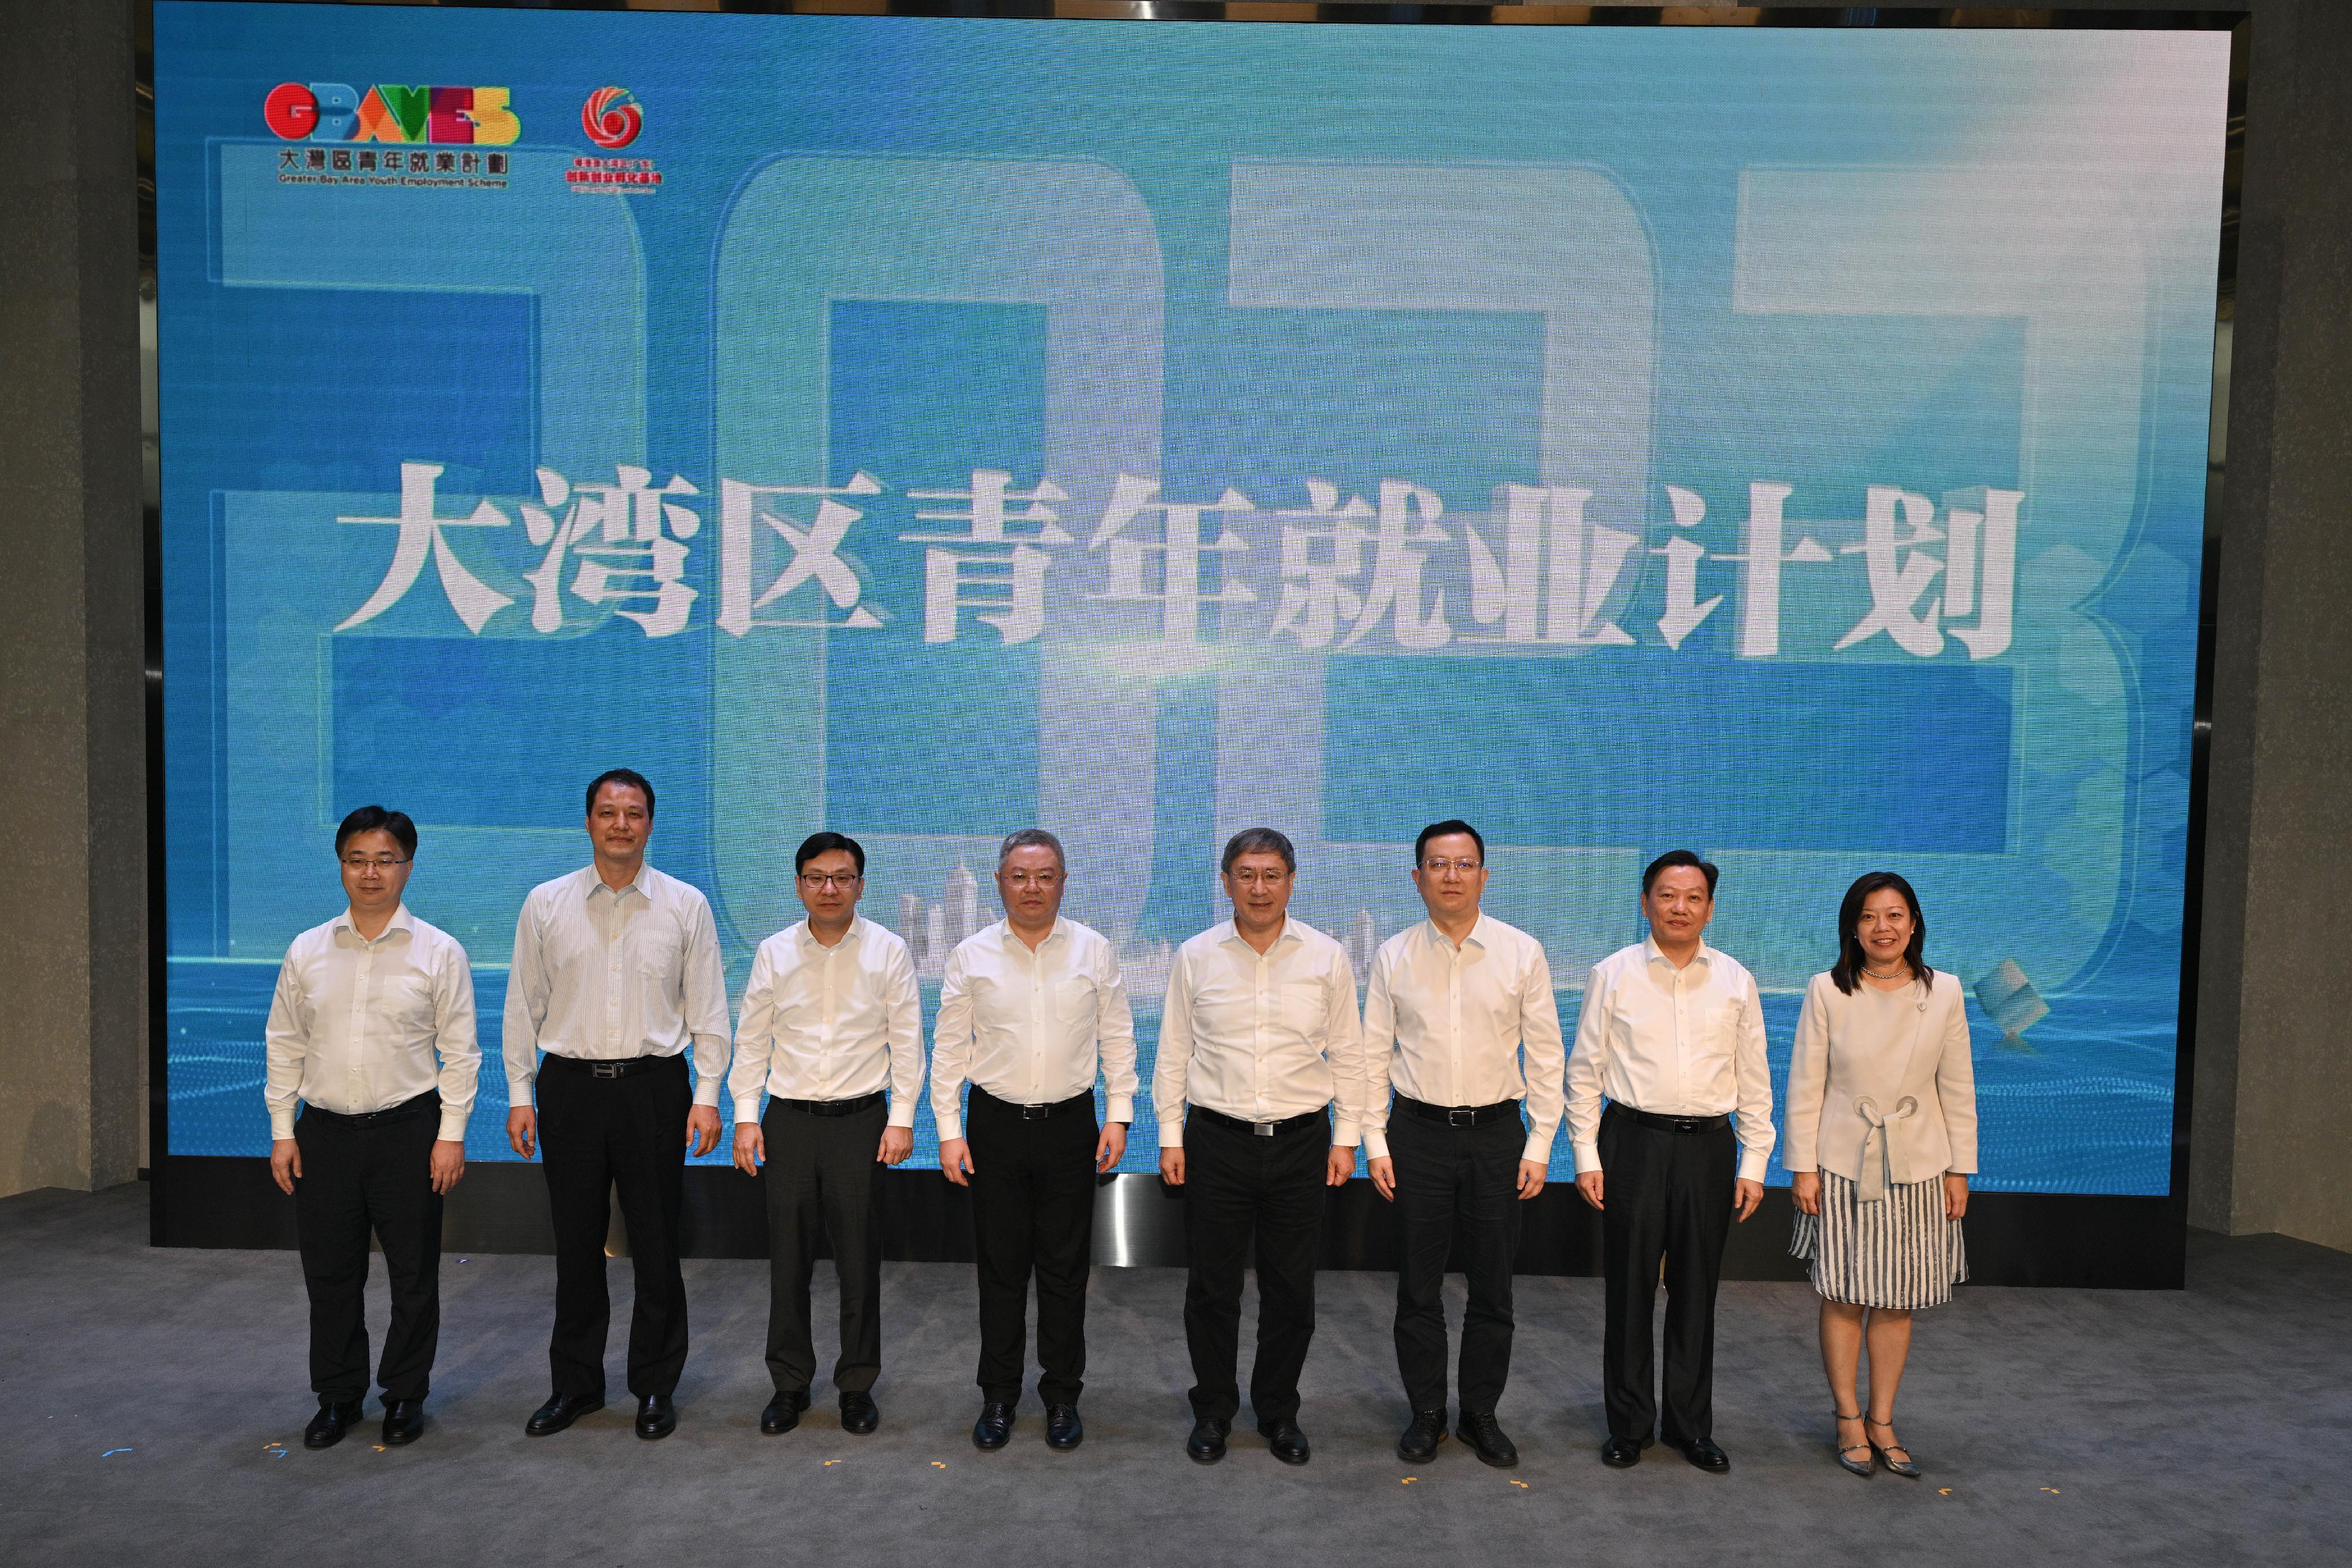 The Deputy Chief Secretary for Administration, Mr Cheuk Wing-hing, attended the Welcoming Ceremony for Young People employed under the Greater Bay Area Youth Employment Scheme in Guangzhou today (September 13). Photo shows Mr Cheuk (fourth right); Deputy Secretary General of People’s Government of Guangdong Province Mr Sun Zhe (fourth left); the Director-General of the Human Resources and Social Security Department of Guangdong Province, Mr Du Minqi (third right); the Secretary for Labour and Welfare, Mr Chris Sun (third left); and the Commissioner for Labour, Ms May Chan (first right), at the ceremony.